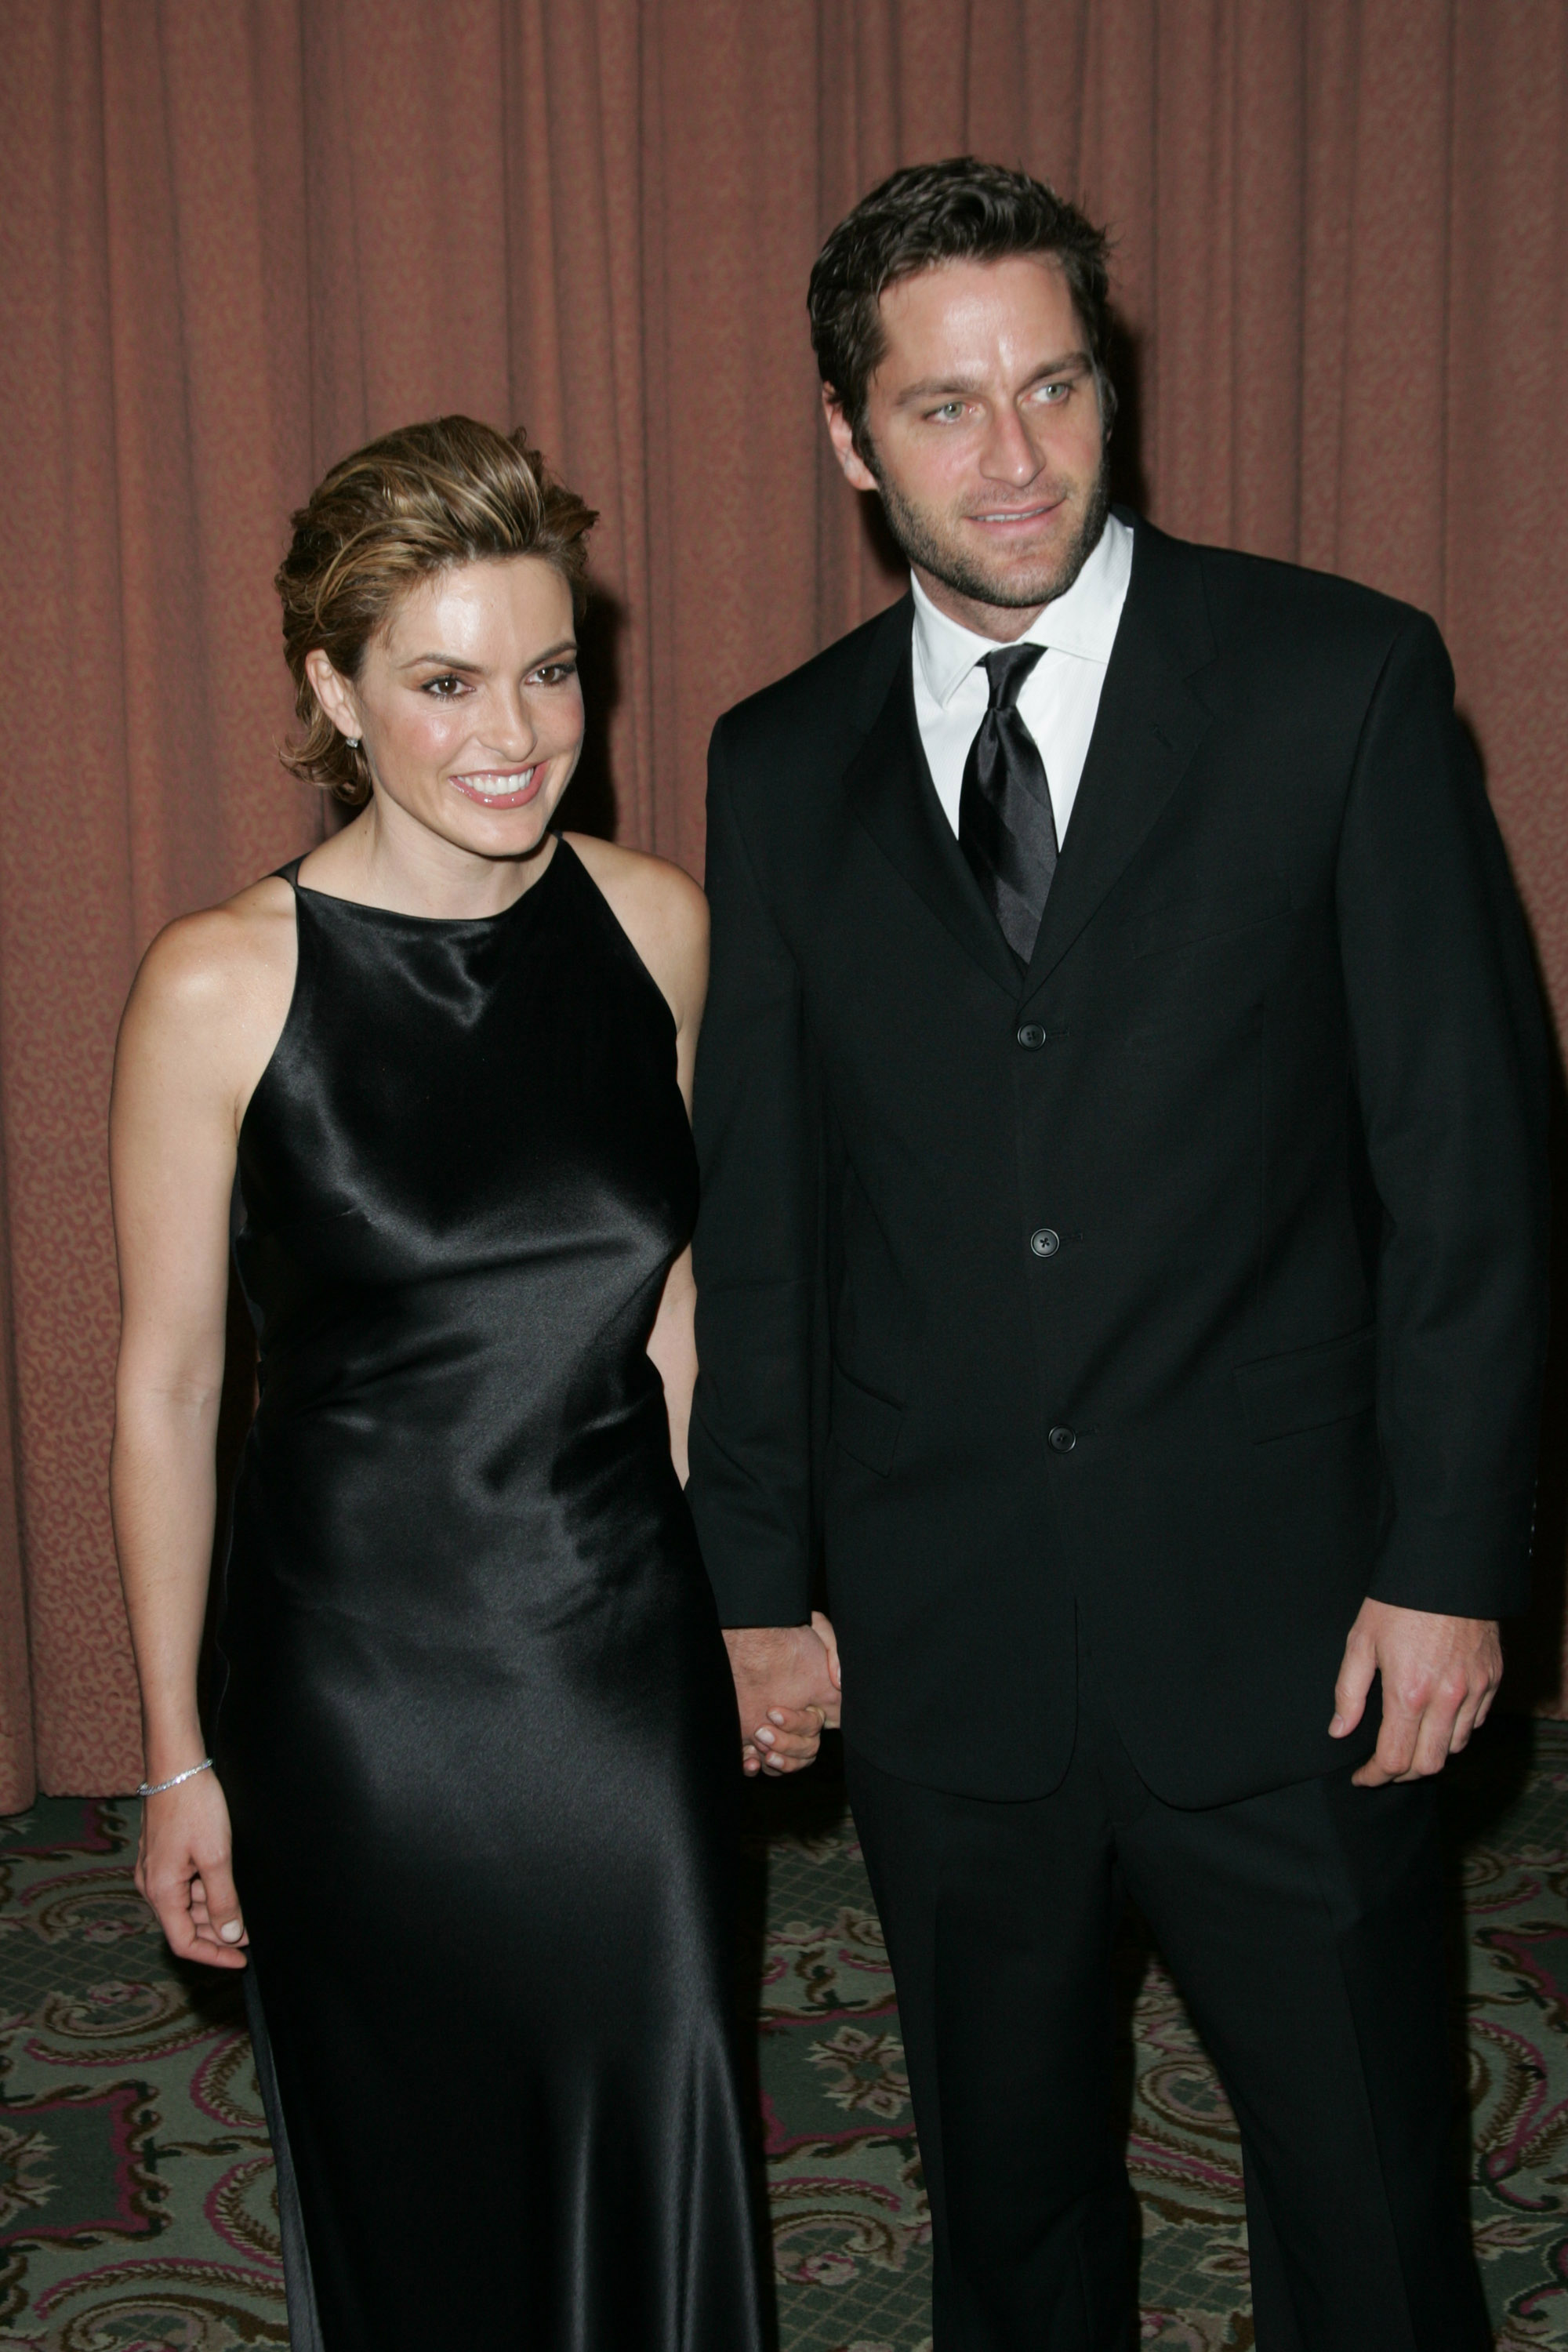 Mariska Hargitay and Peter Hermann during the American Women in Radio & Television 29th Annual Gracie Allen Awards at Hilton Hotel on June 22, 2004 in New York City | Source: Getty Images